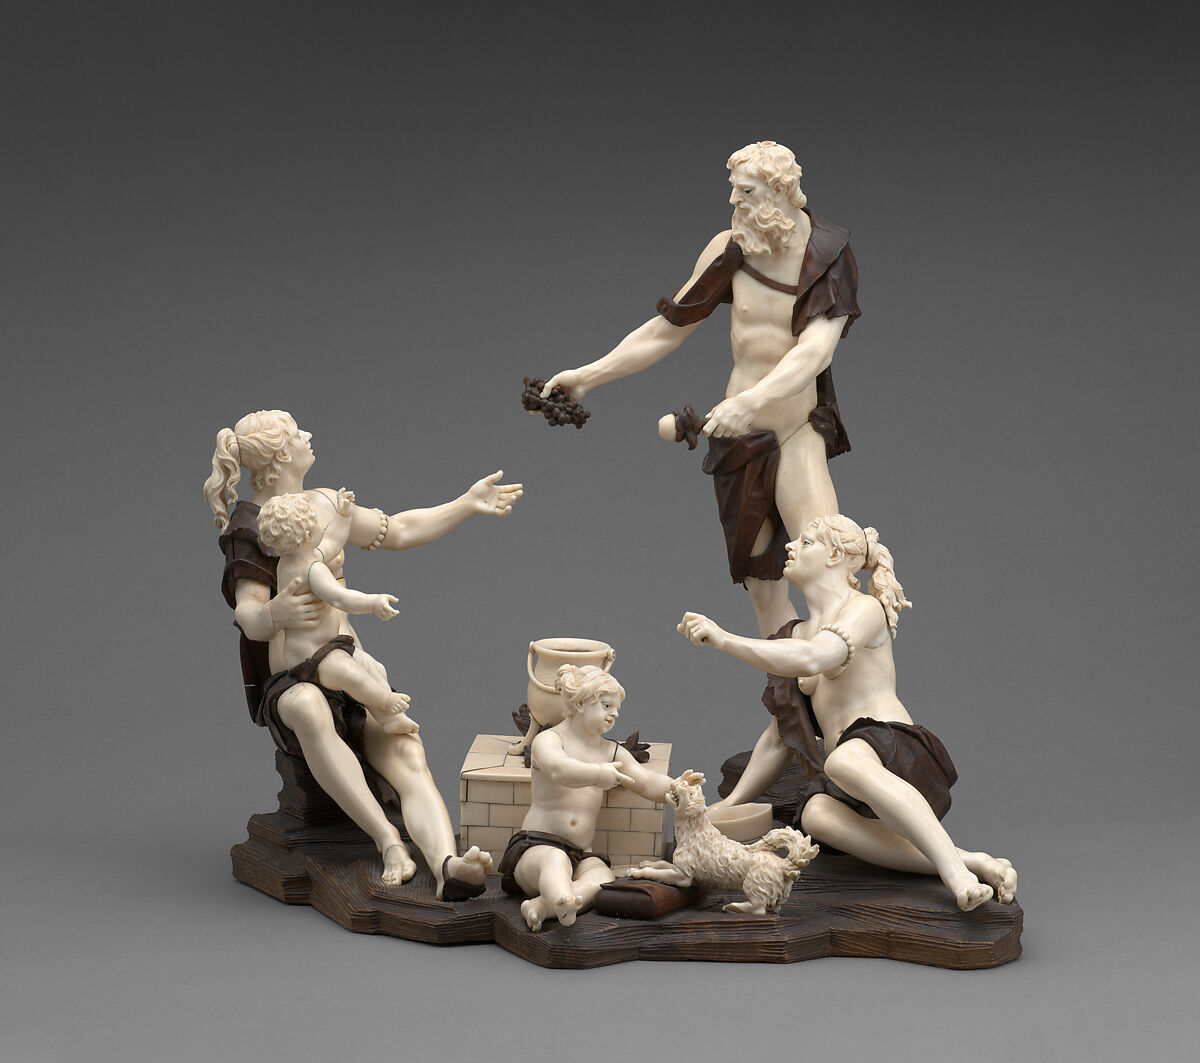 Resting Wanderers, Attributed to Simon Troger (German, 1683–1768), Historic ivory, walnut, glass, Southern German 